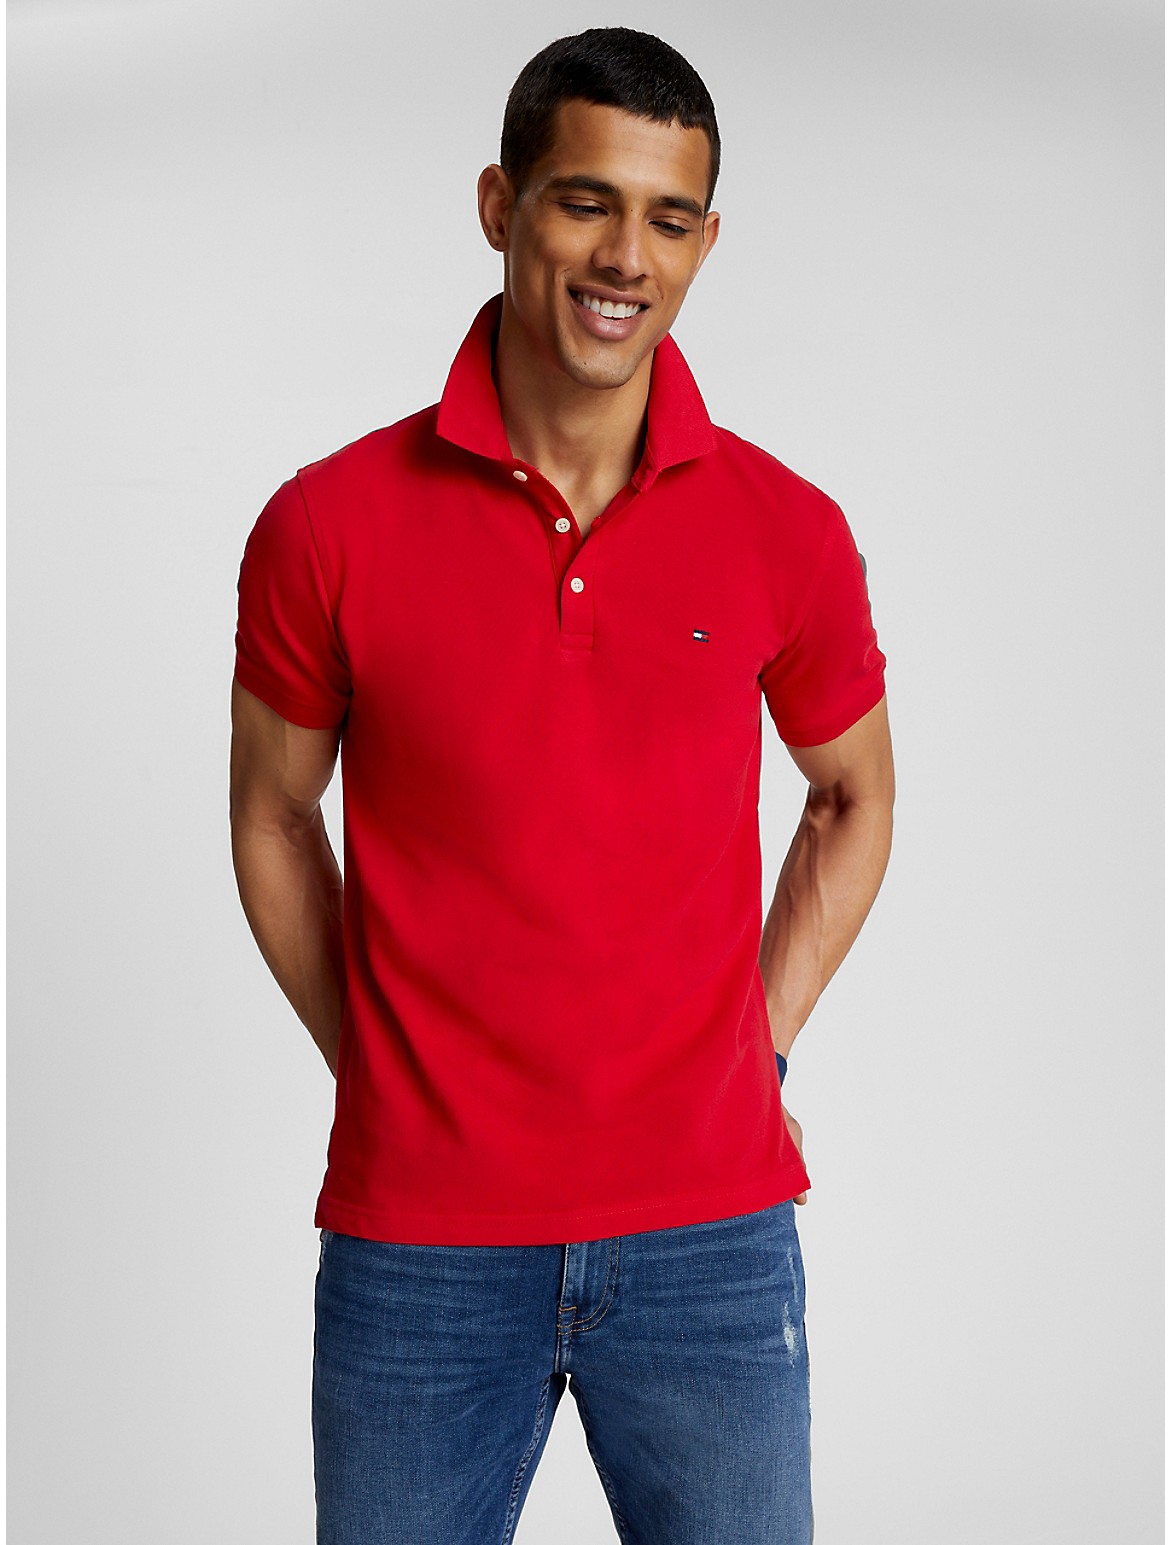 Tommy Hilfiger Men's Slim Fit Tommy Polo - Red - S